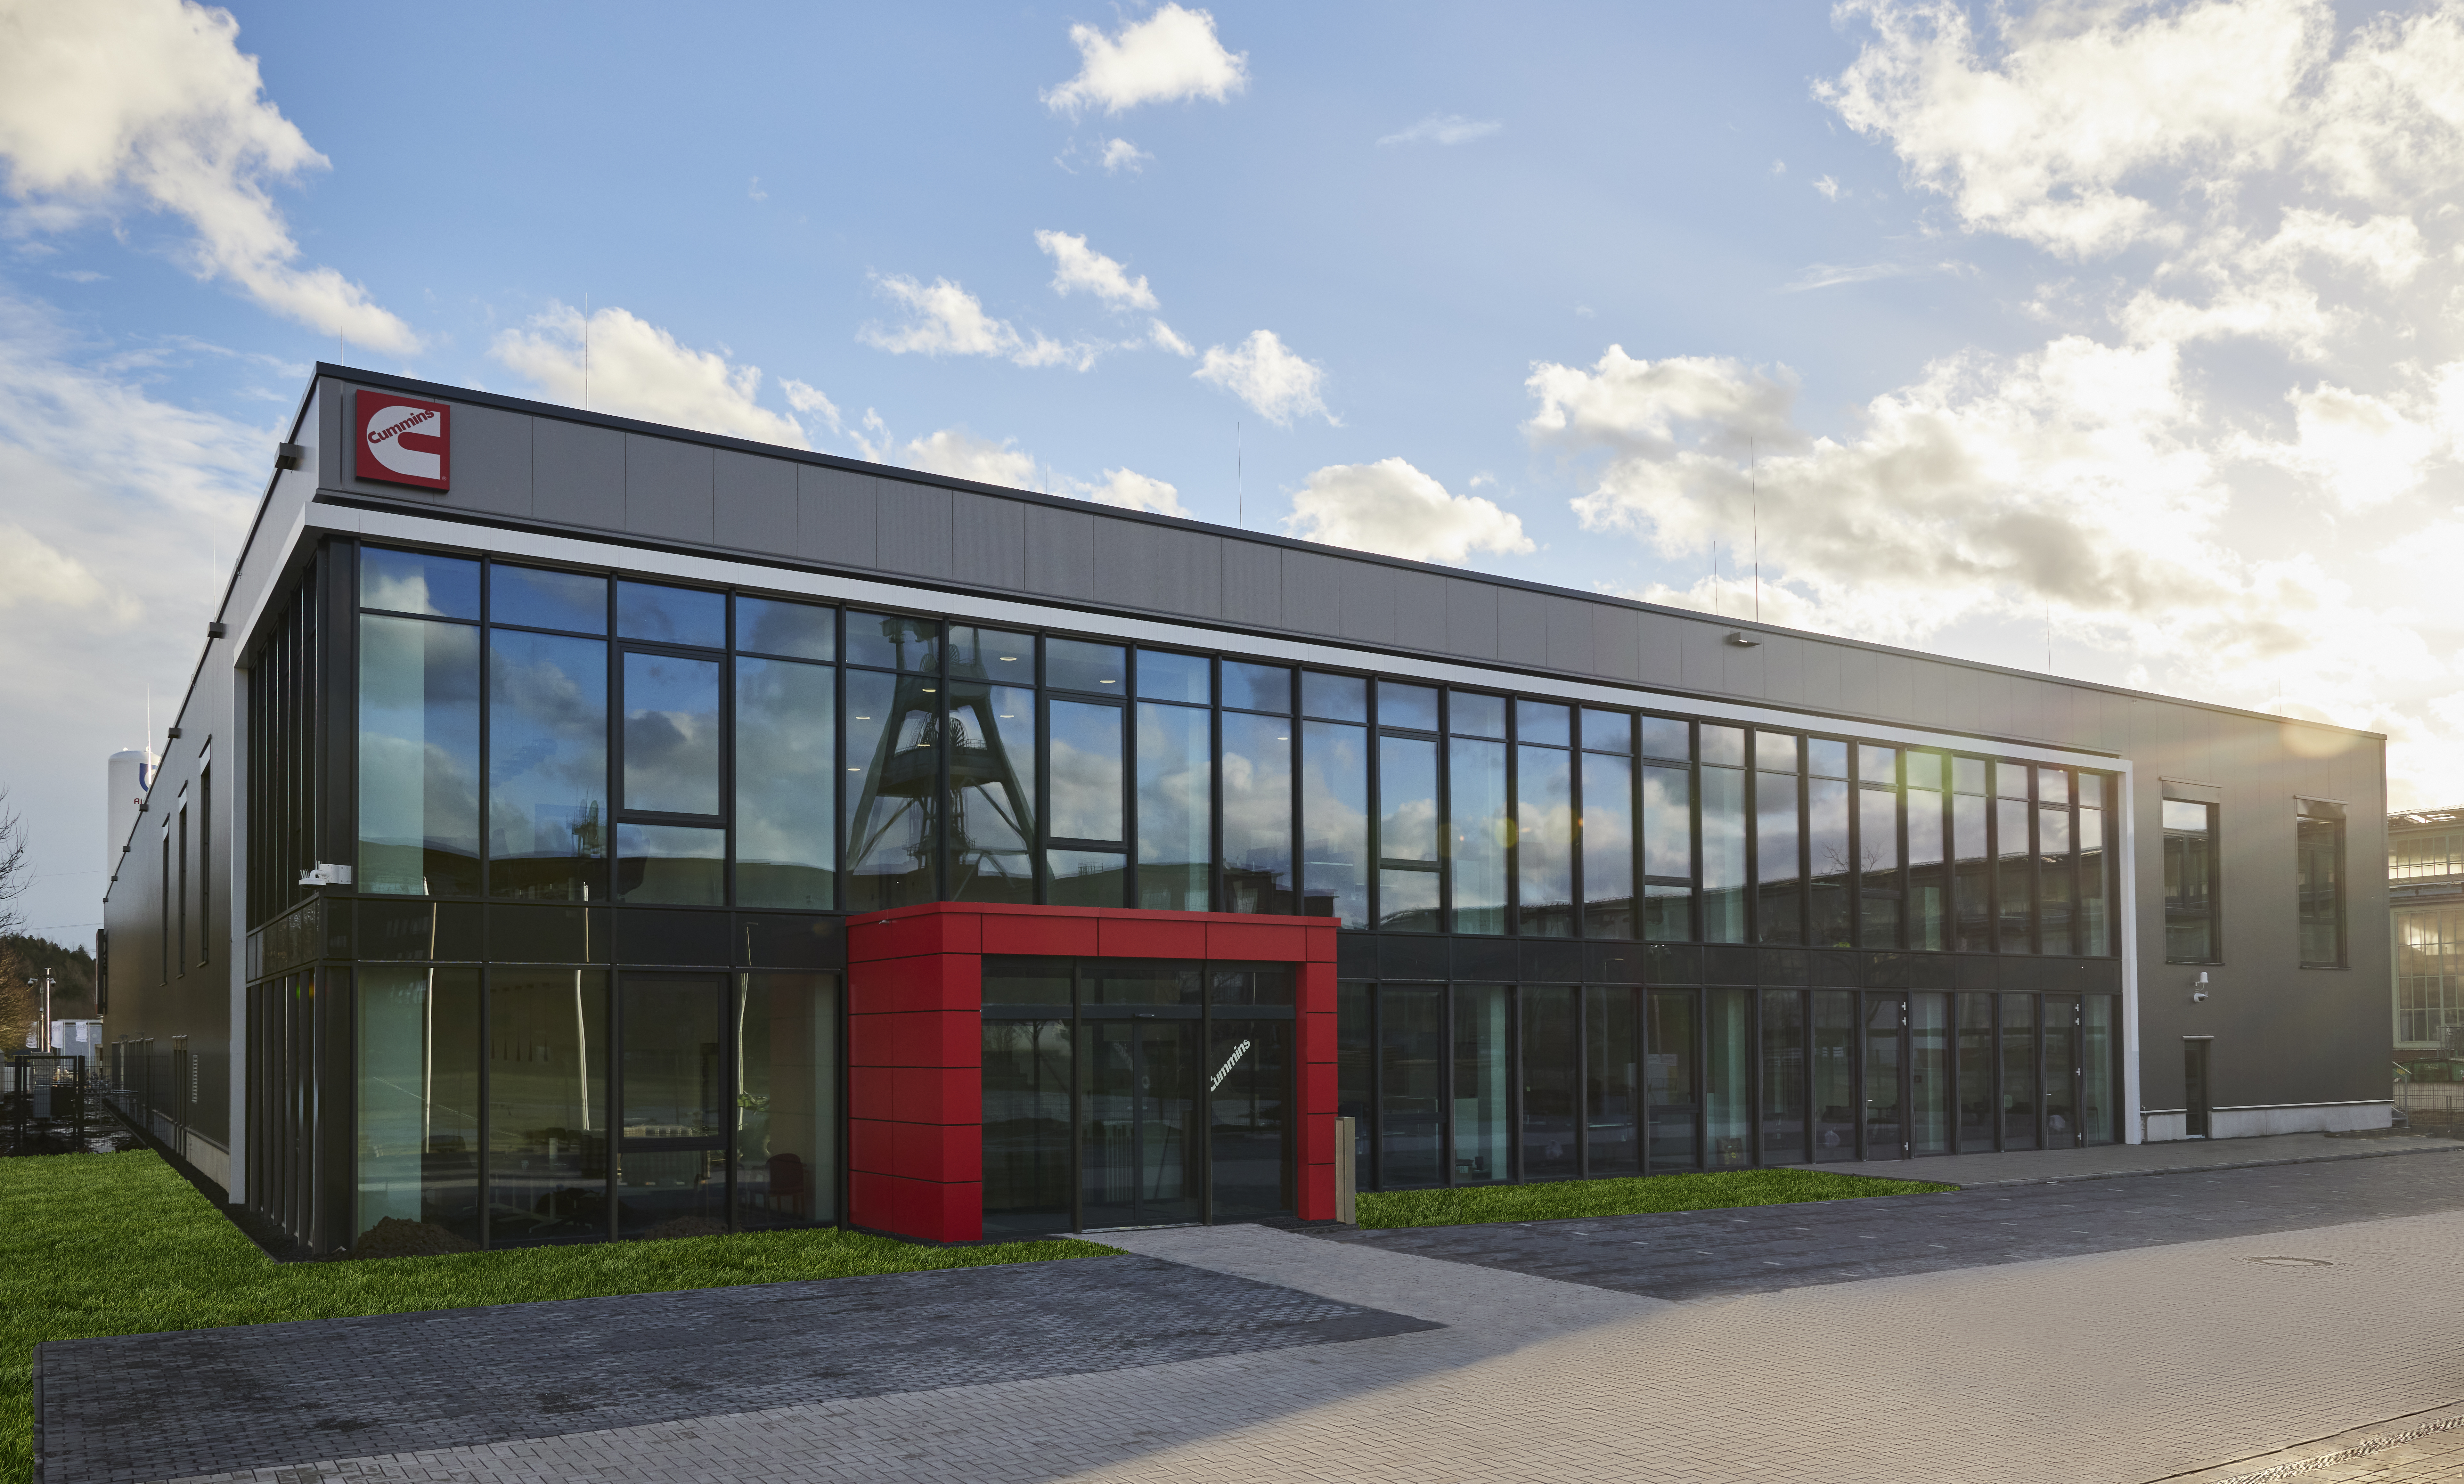 hydrogen fuel cell systems product center in herten germany